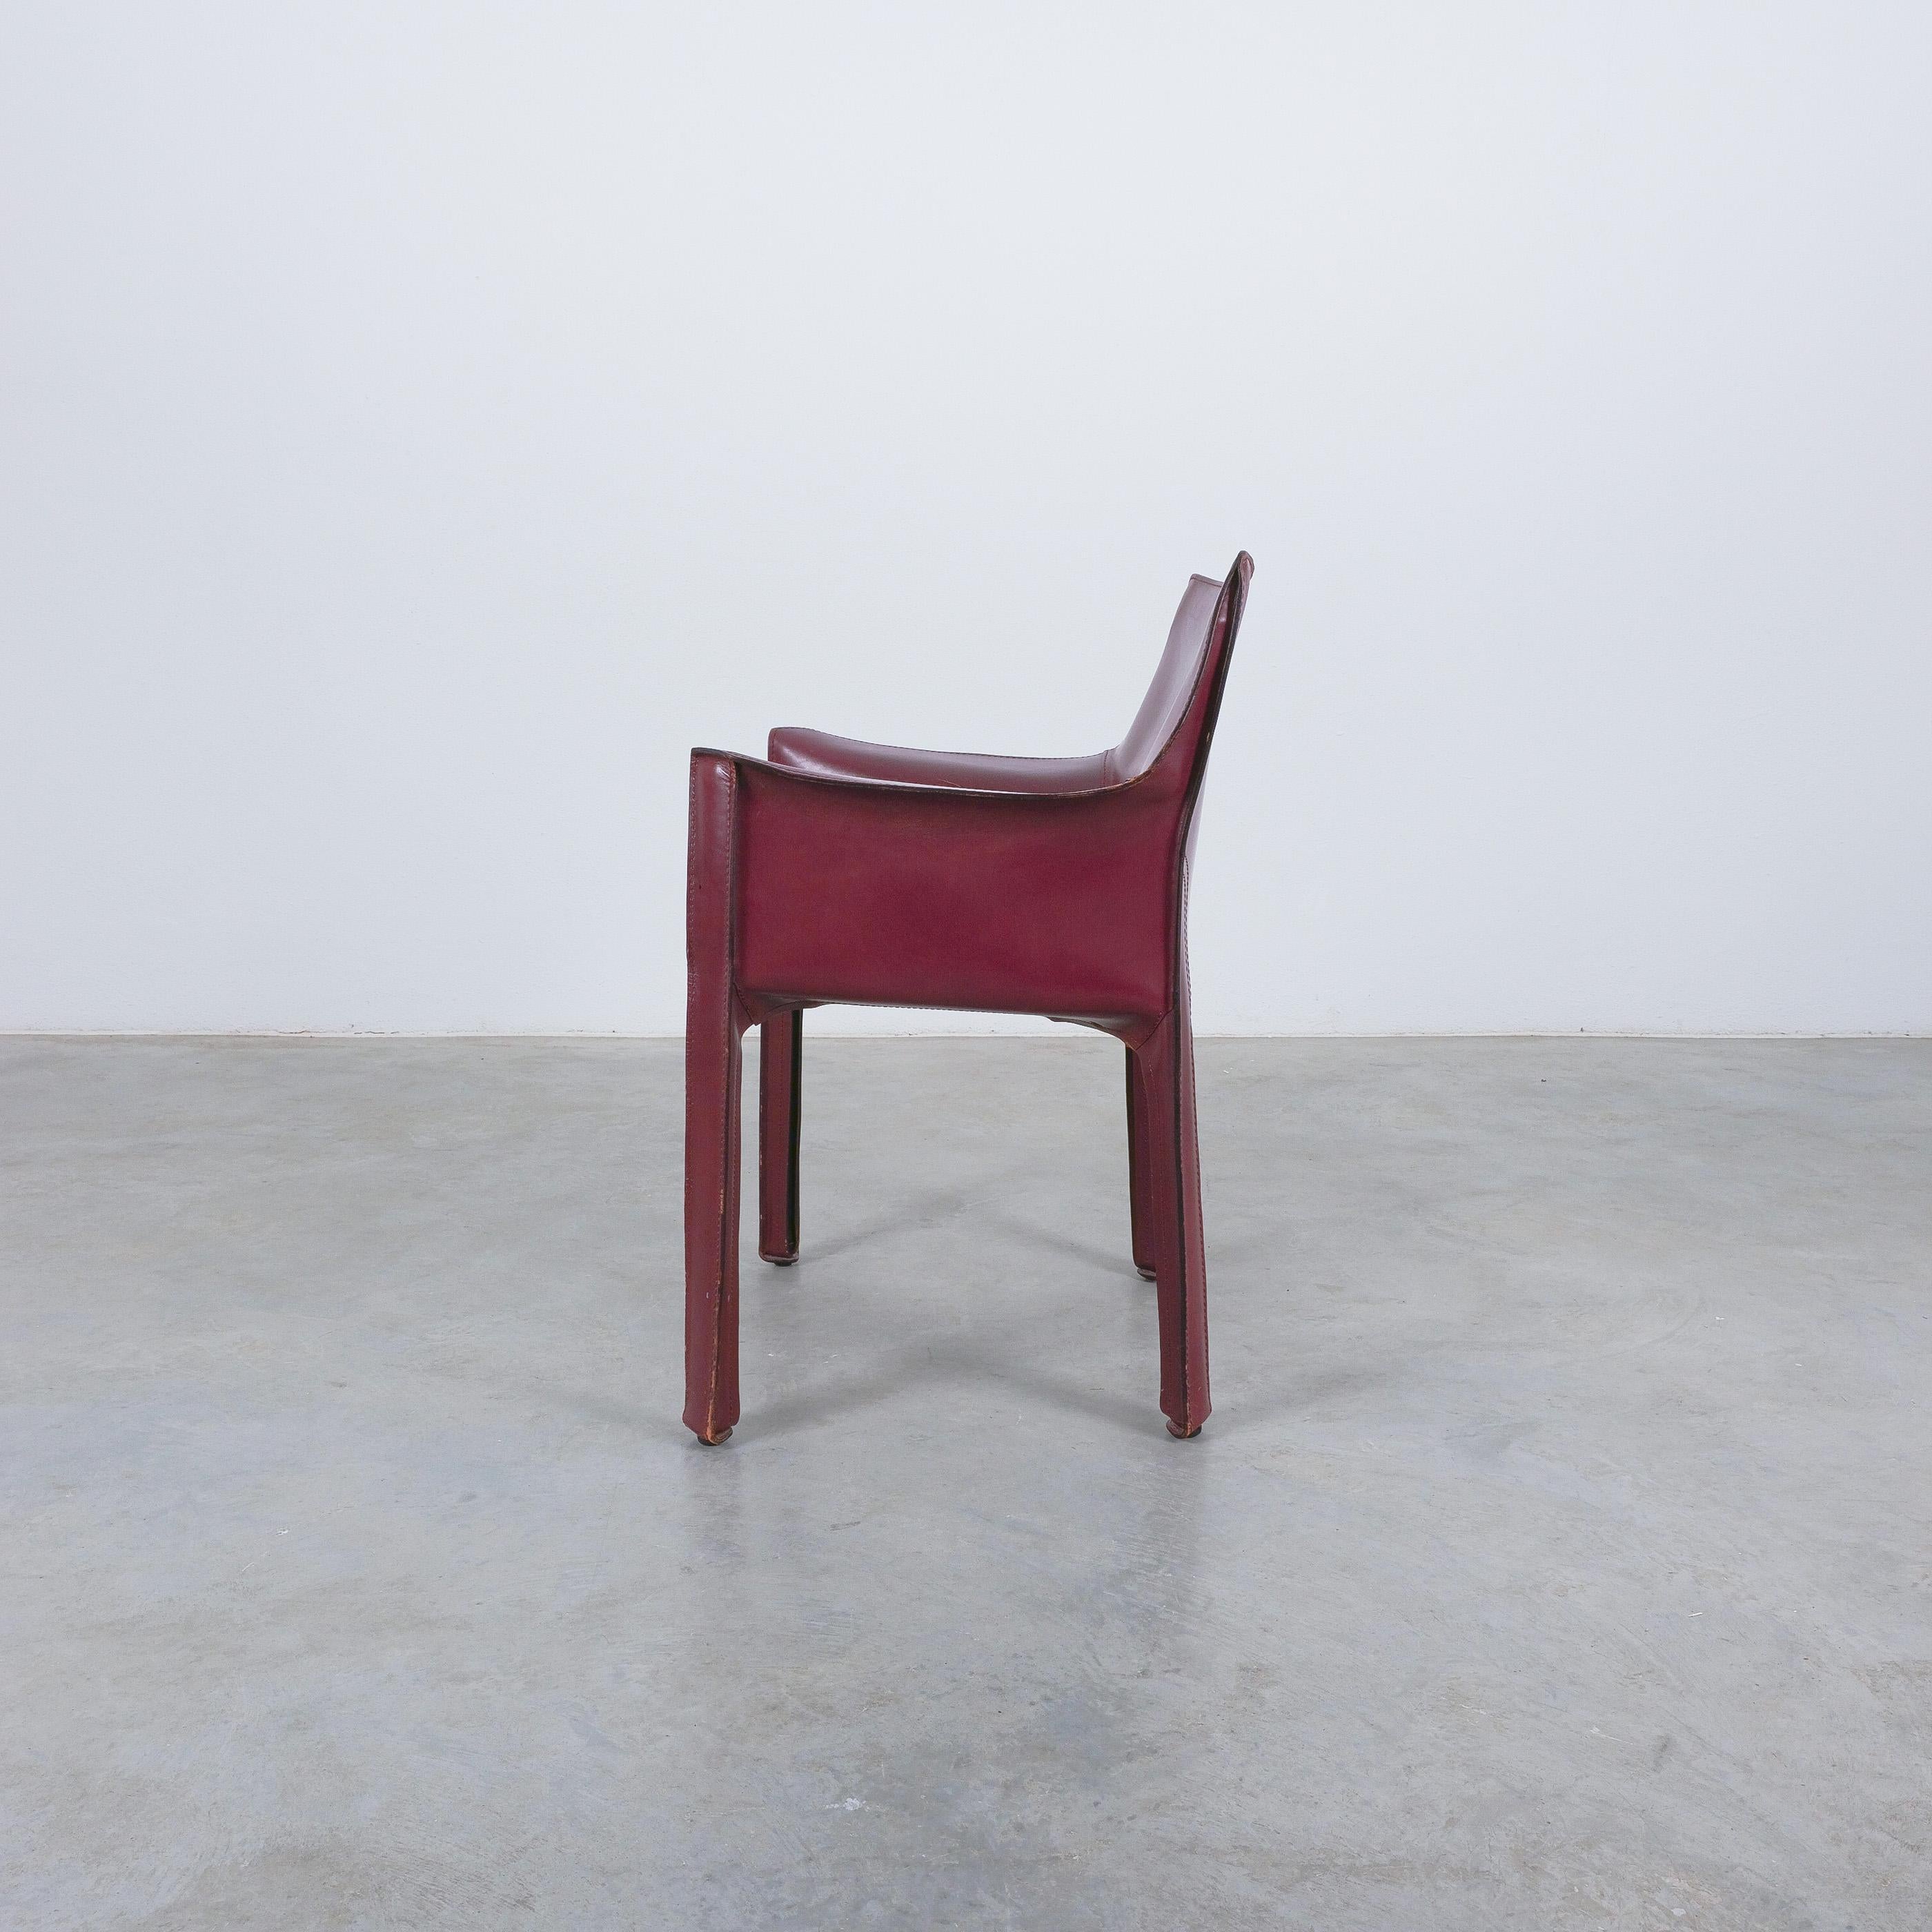 Italian Mario Bellini Cassina Cab 413 Burgundy Red Leather Dining Chairs, 1980